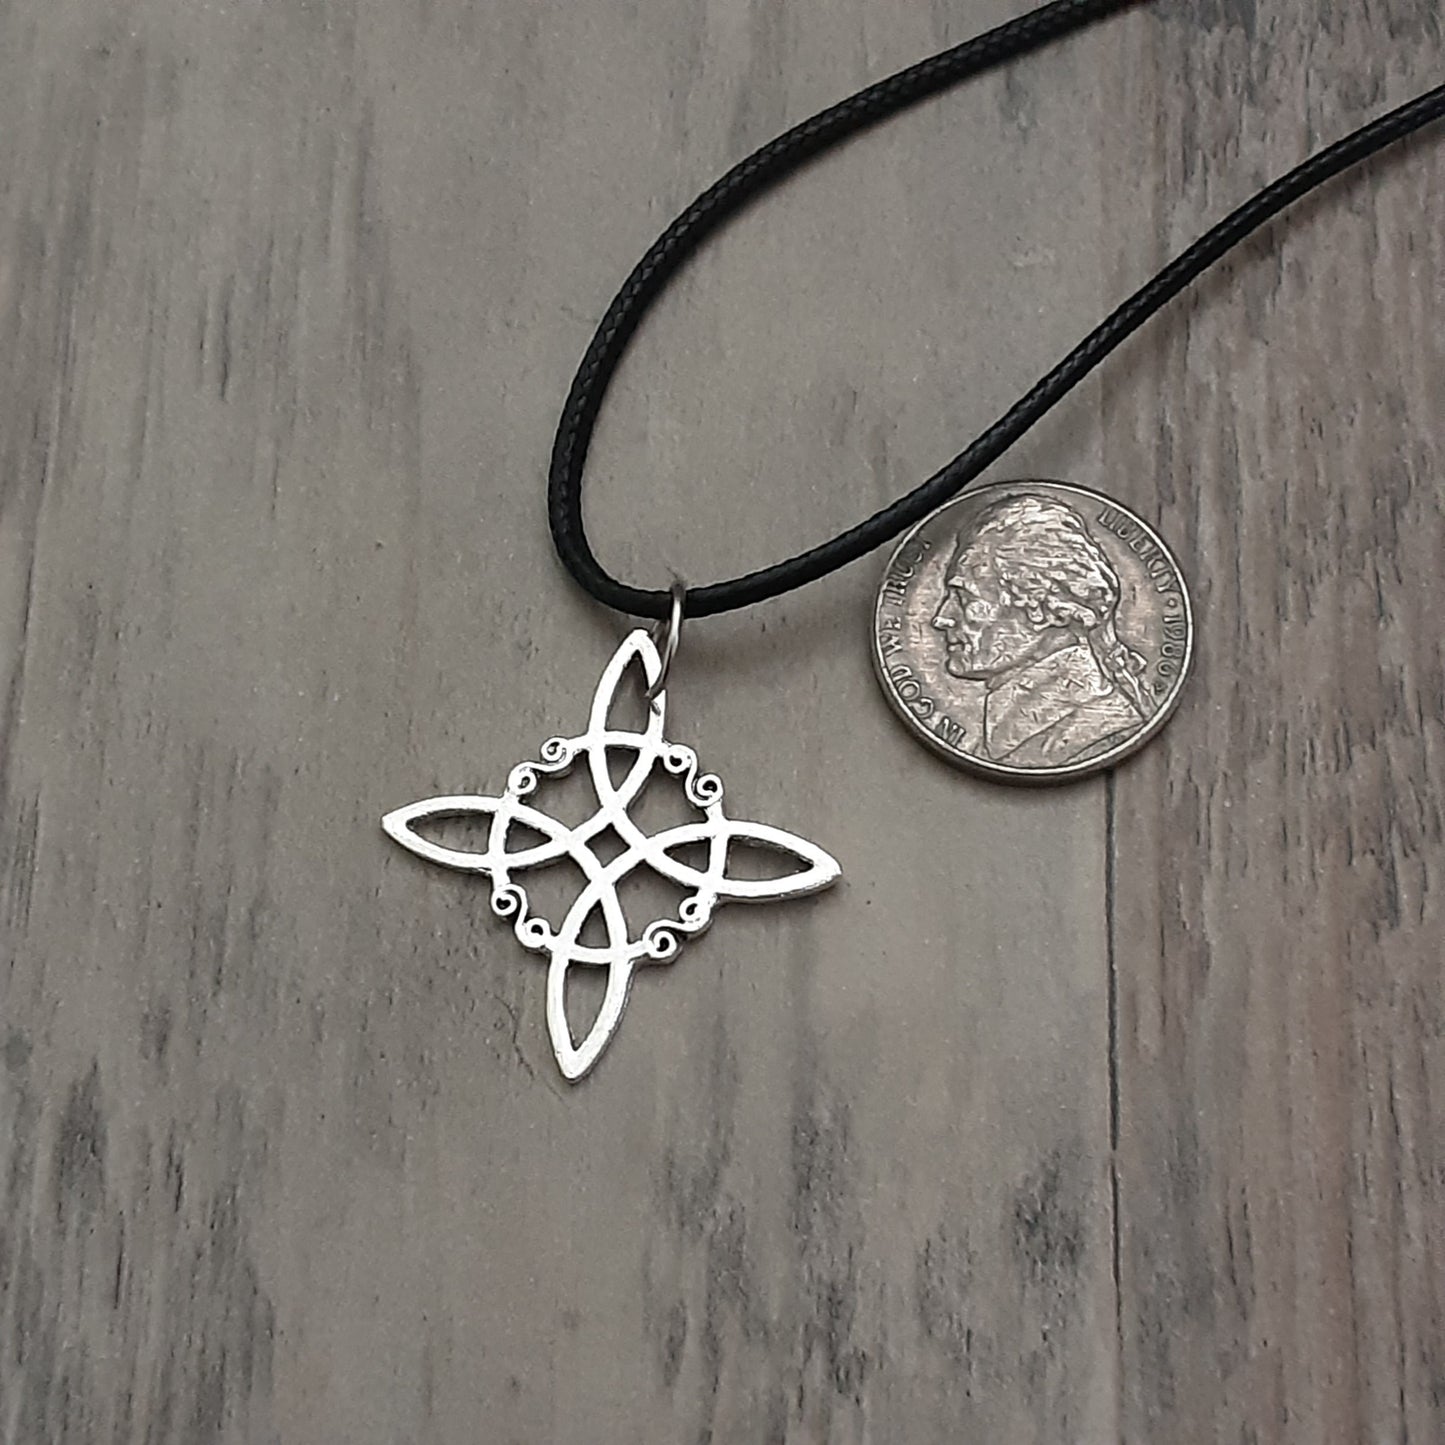 Silver witch knot symbol charm on black cord necklace next to nickel on grey wooden background